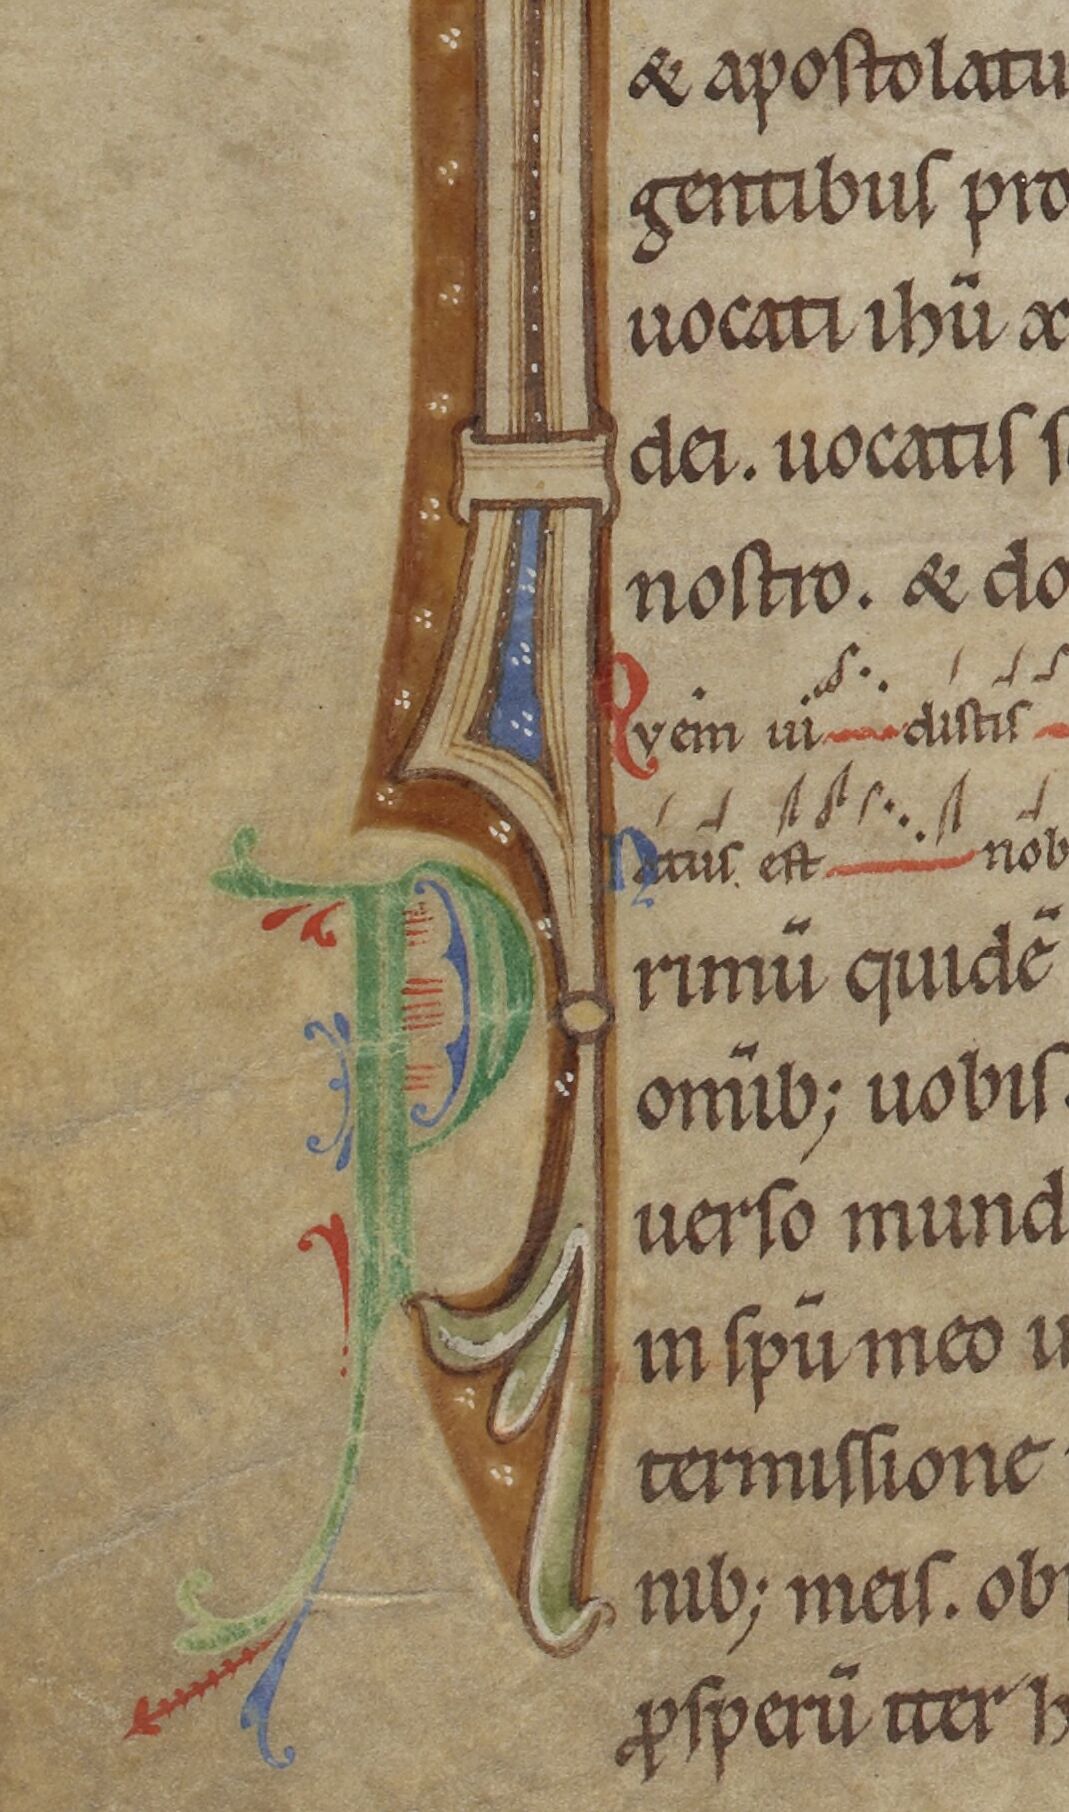 Inside the tail of one initial, another